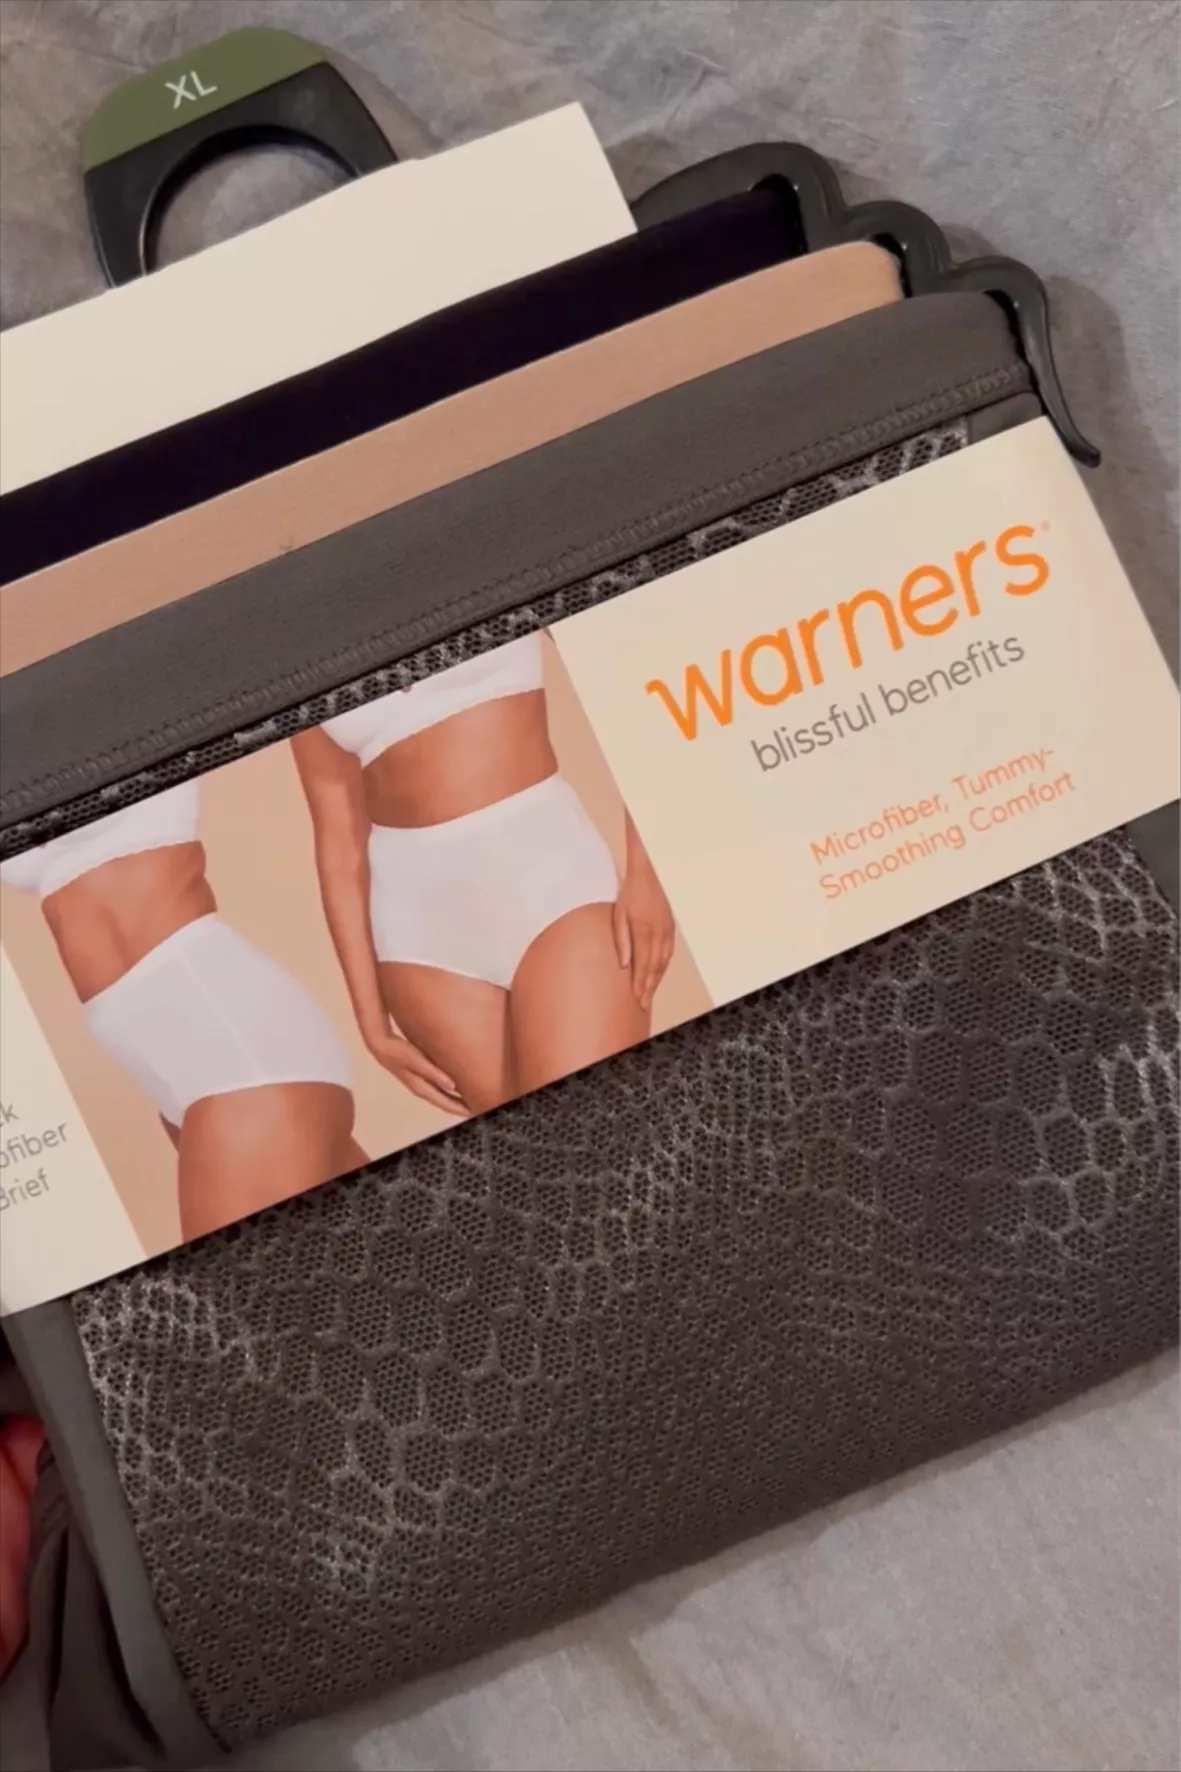 Warners® Blissful Benefits … curated on LTK